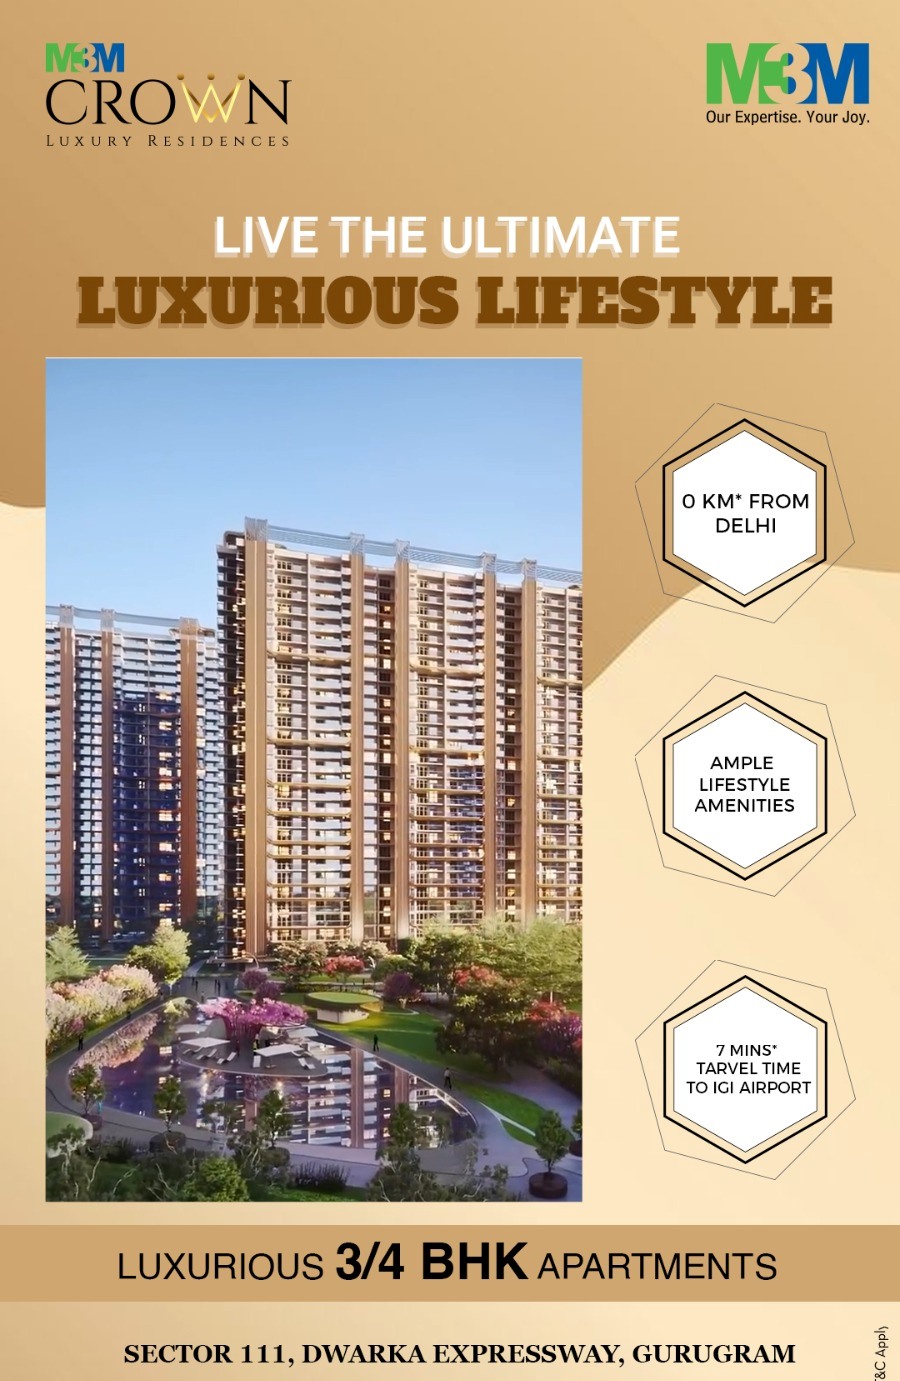 Live the ultimate luxurious lifestyle at M3M Crown in Dwarka Expressway, Gurgaon Update